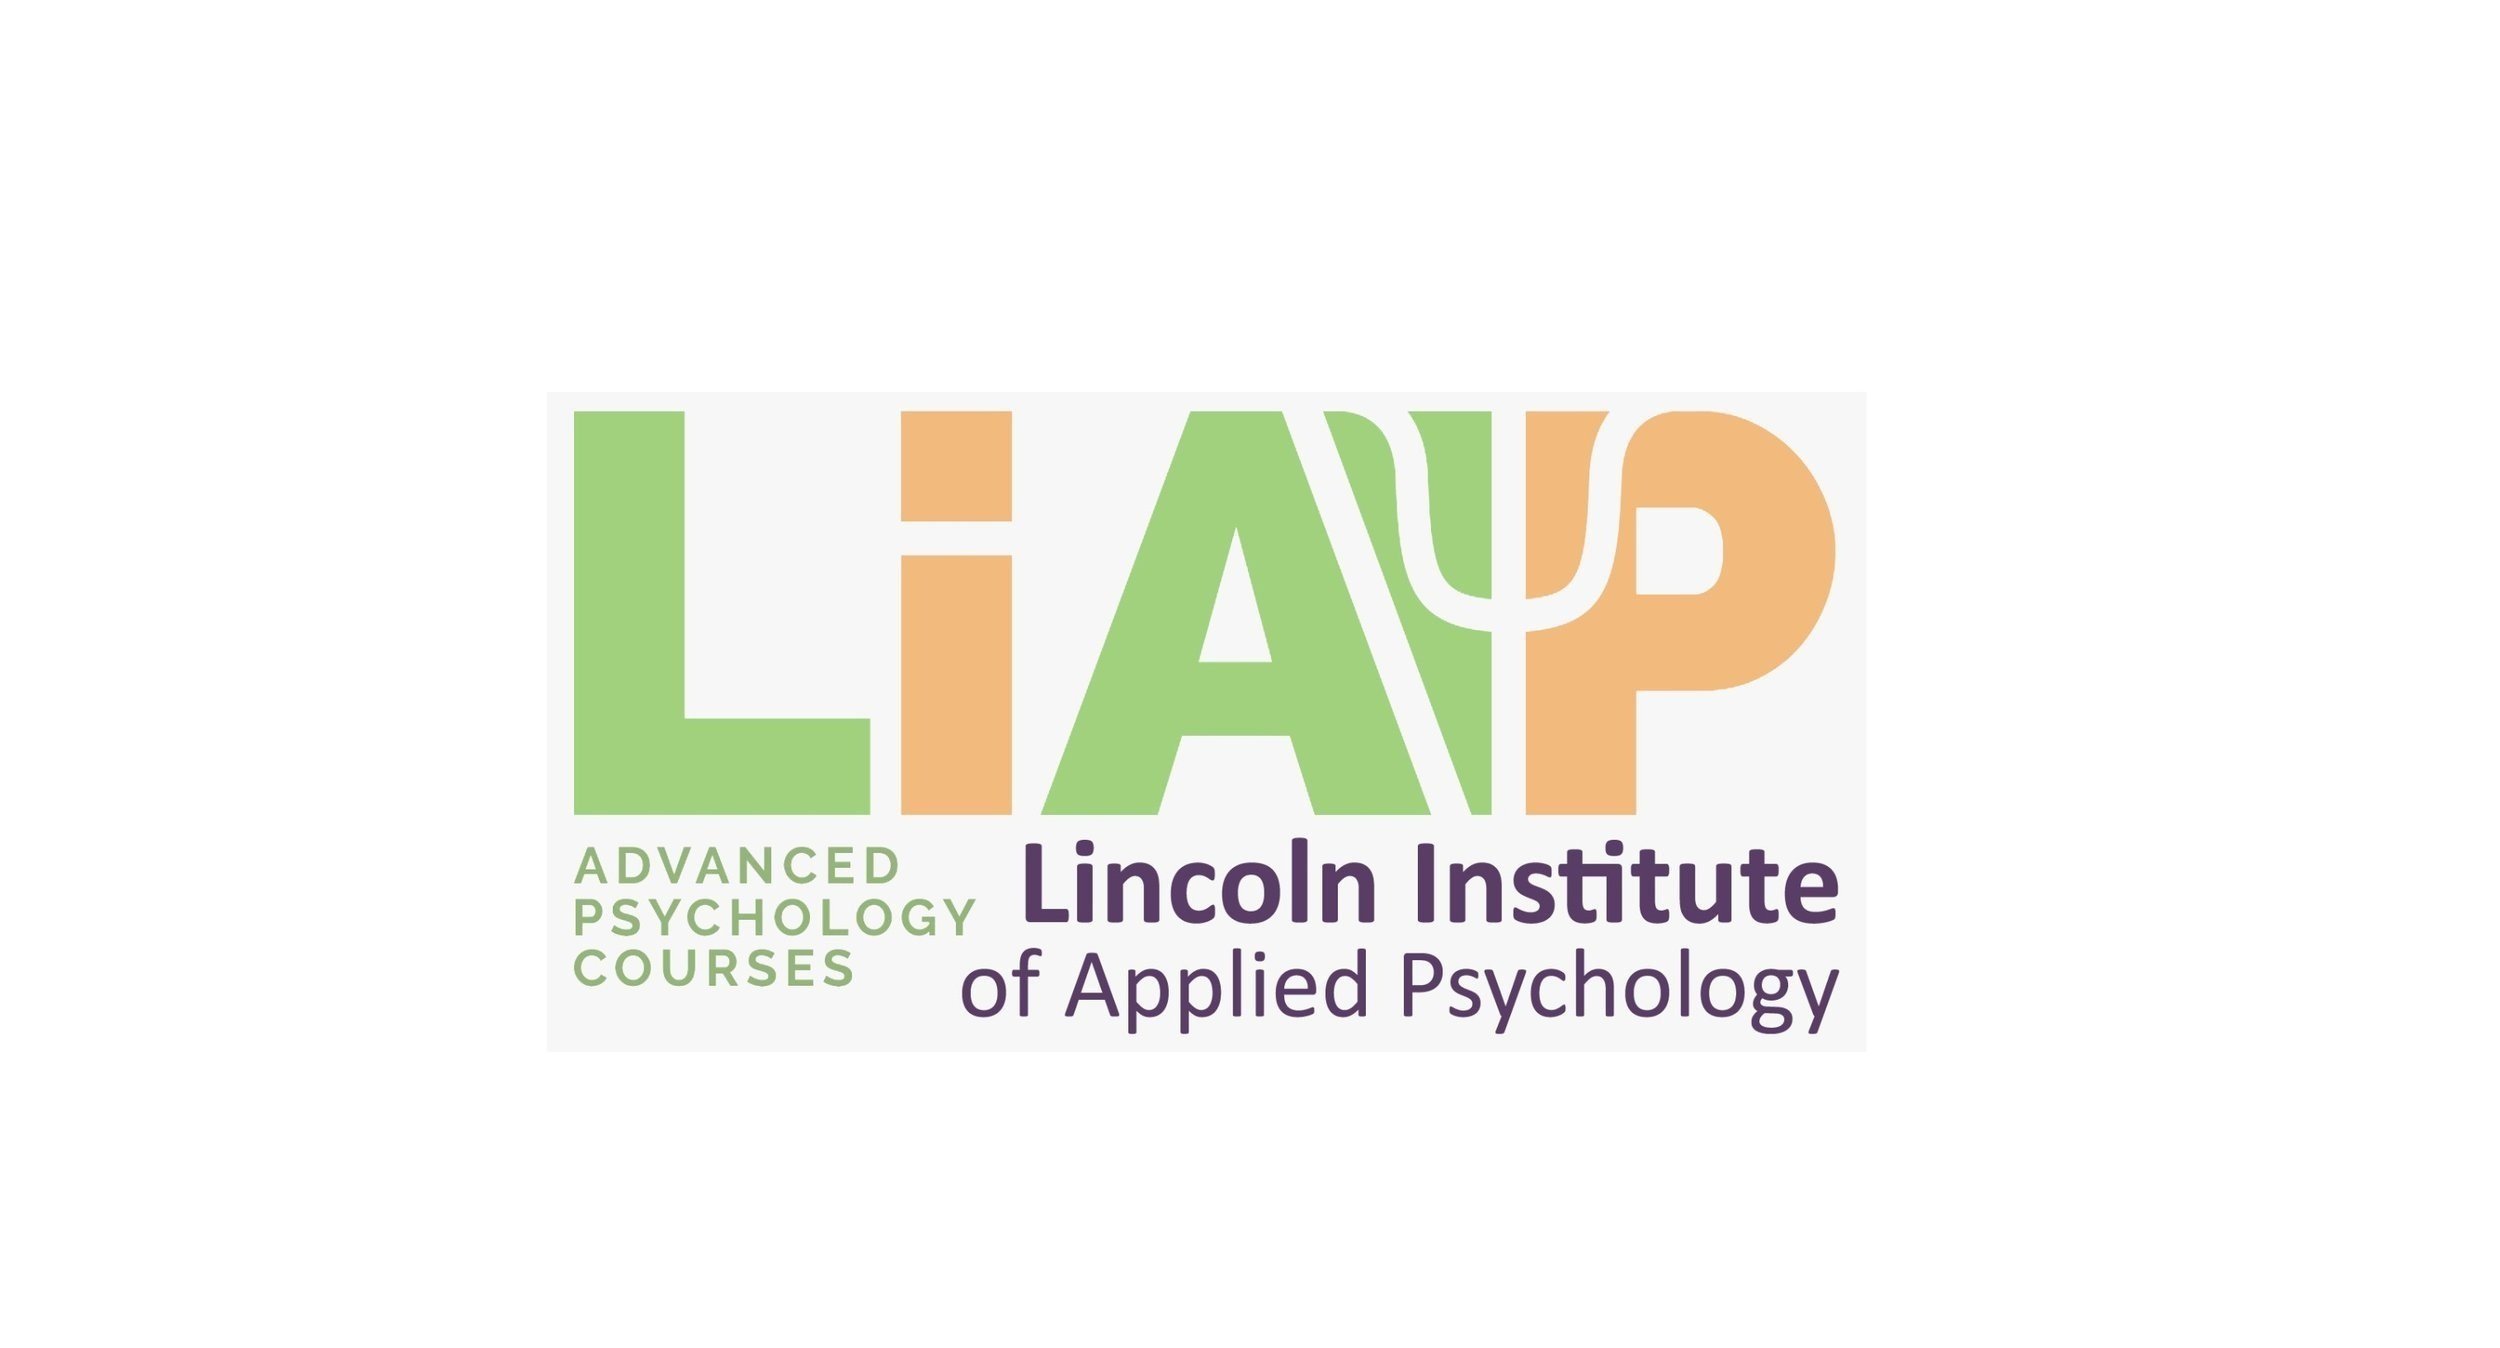  Lincoln Institute of Applied Psychology 